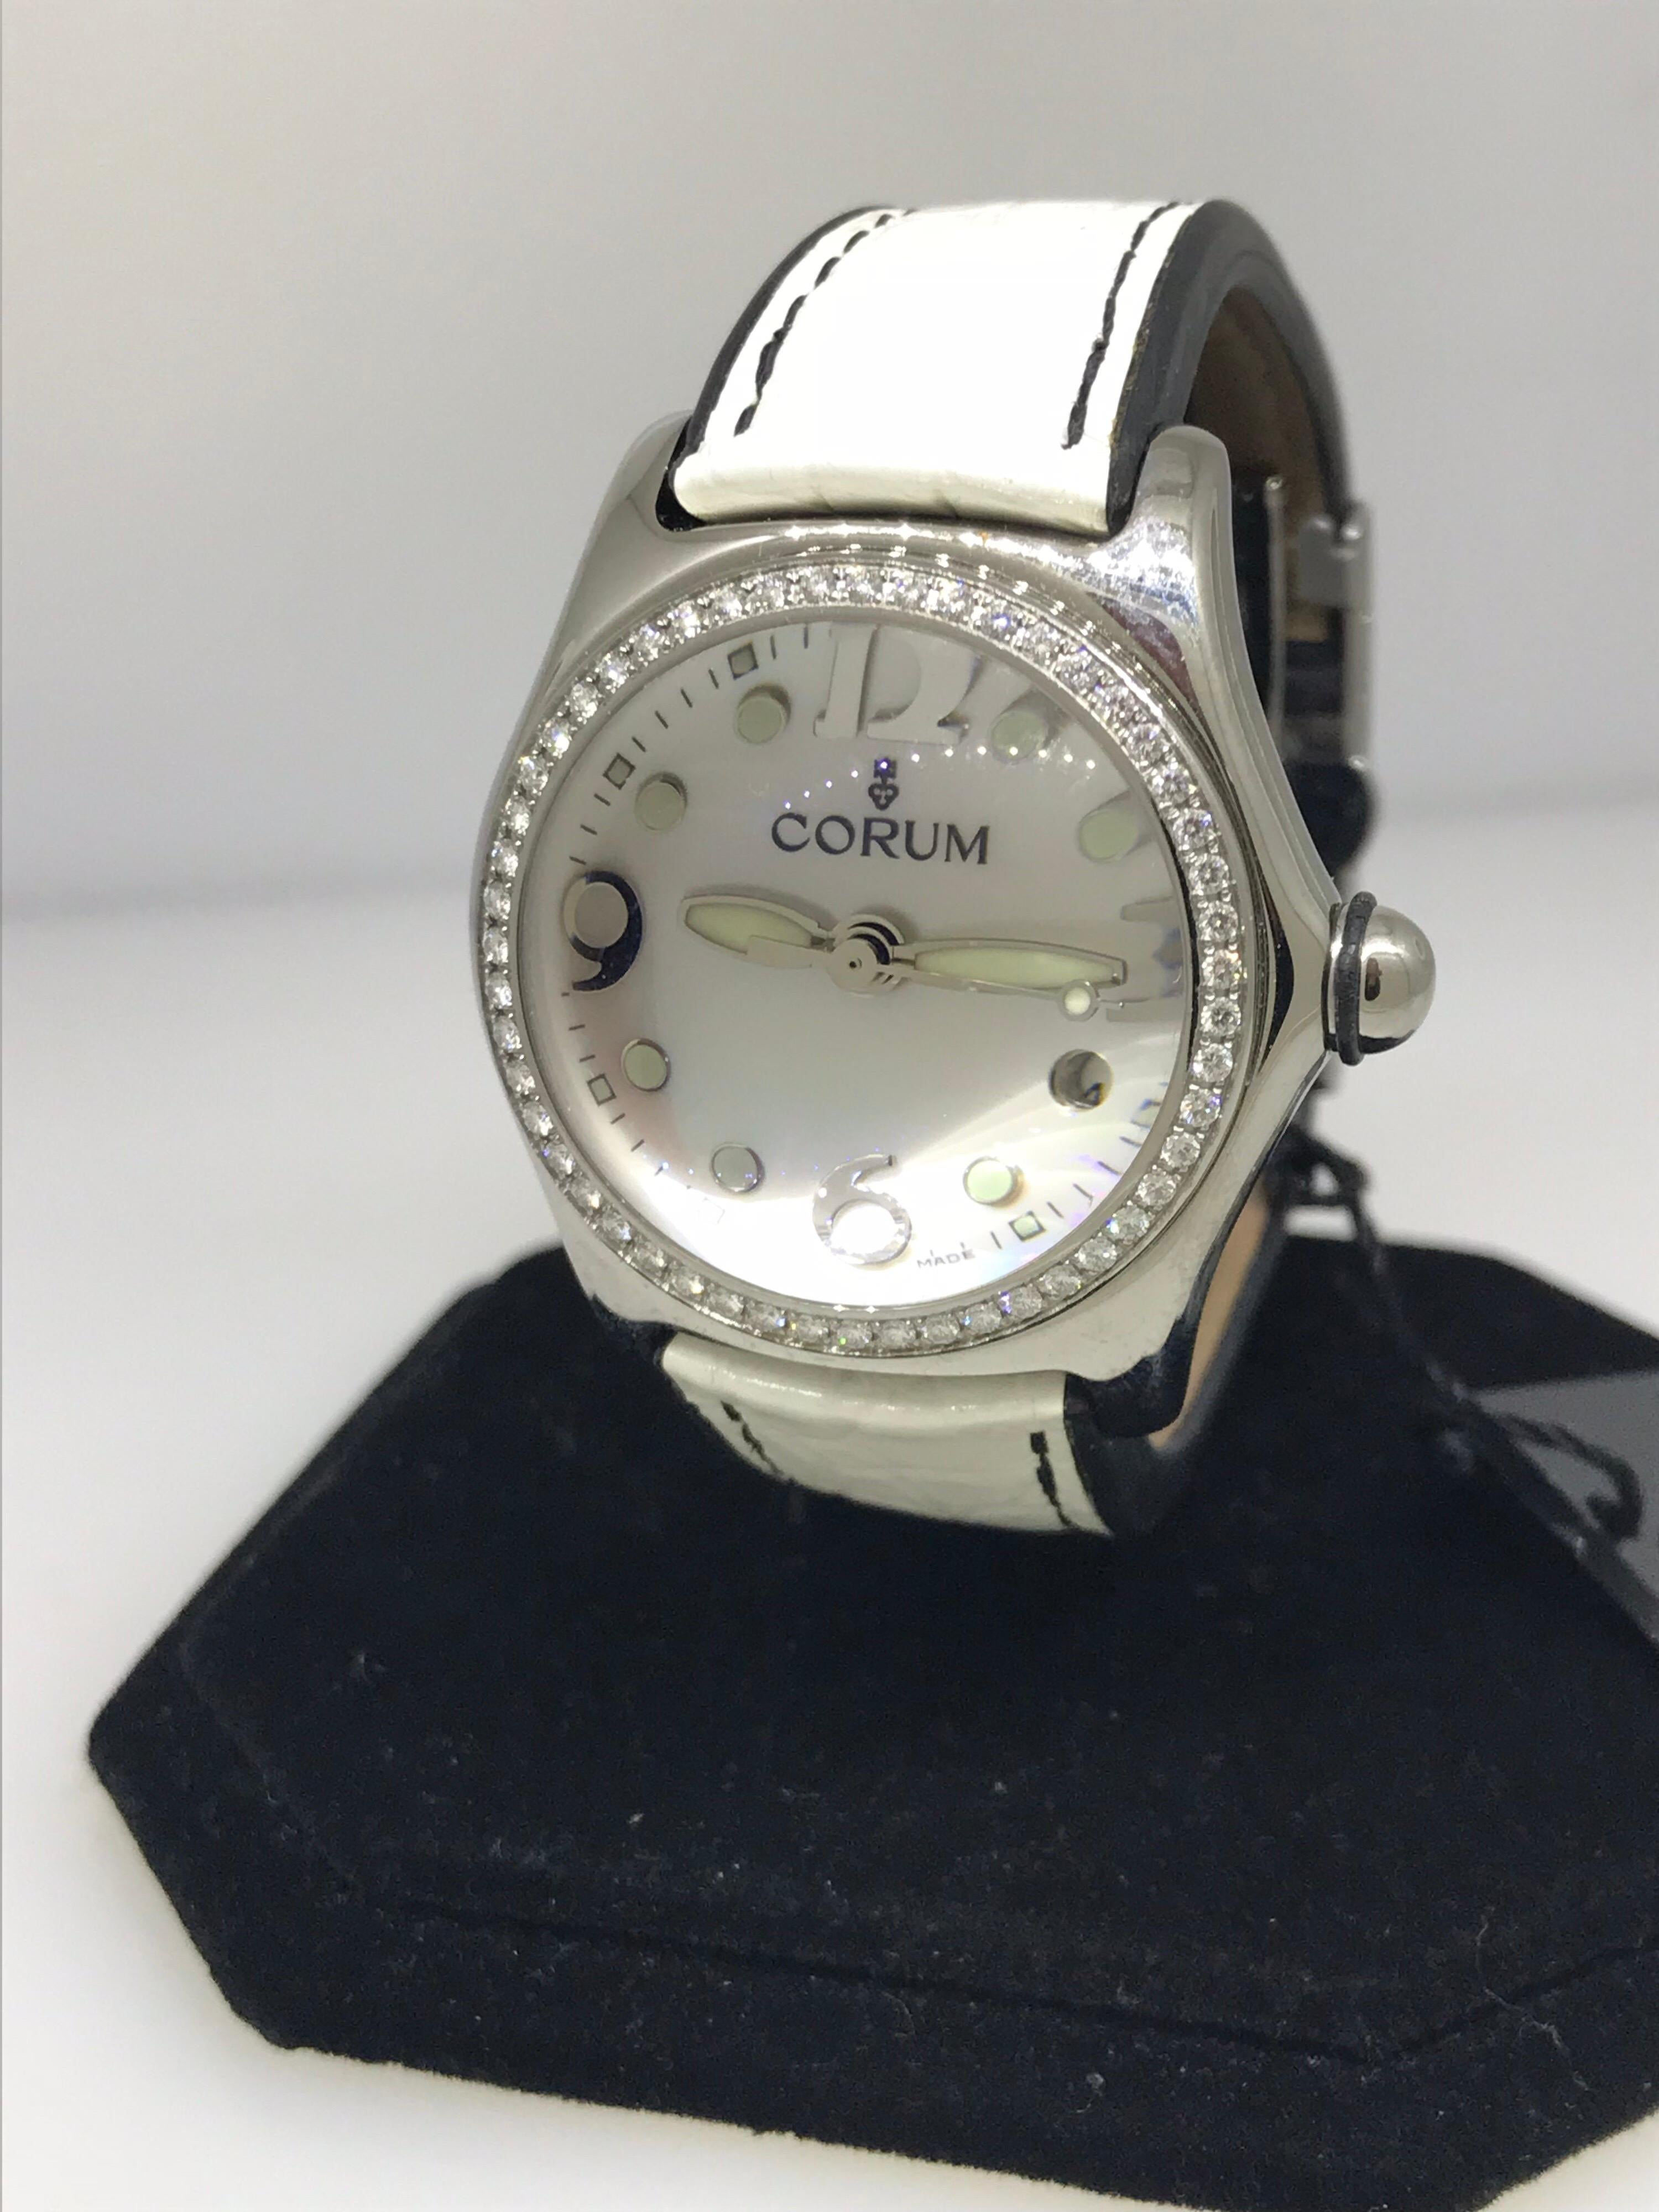 Corum Bubble Ladies Watch

Model Number: 3915147

100% Authentic

New / Old Stock

Comes with a generic watch box

Stainless Steel Case

Diamond Bezel

White Dial

Date Display at 3

White Leather Band

Deployment Buckle

Retails for $6,950

